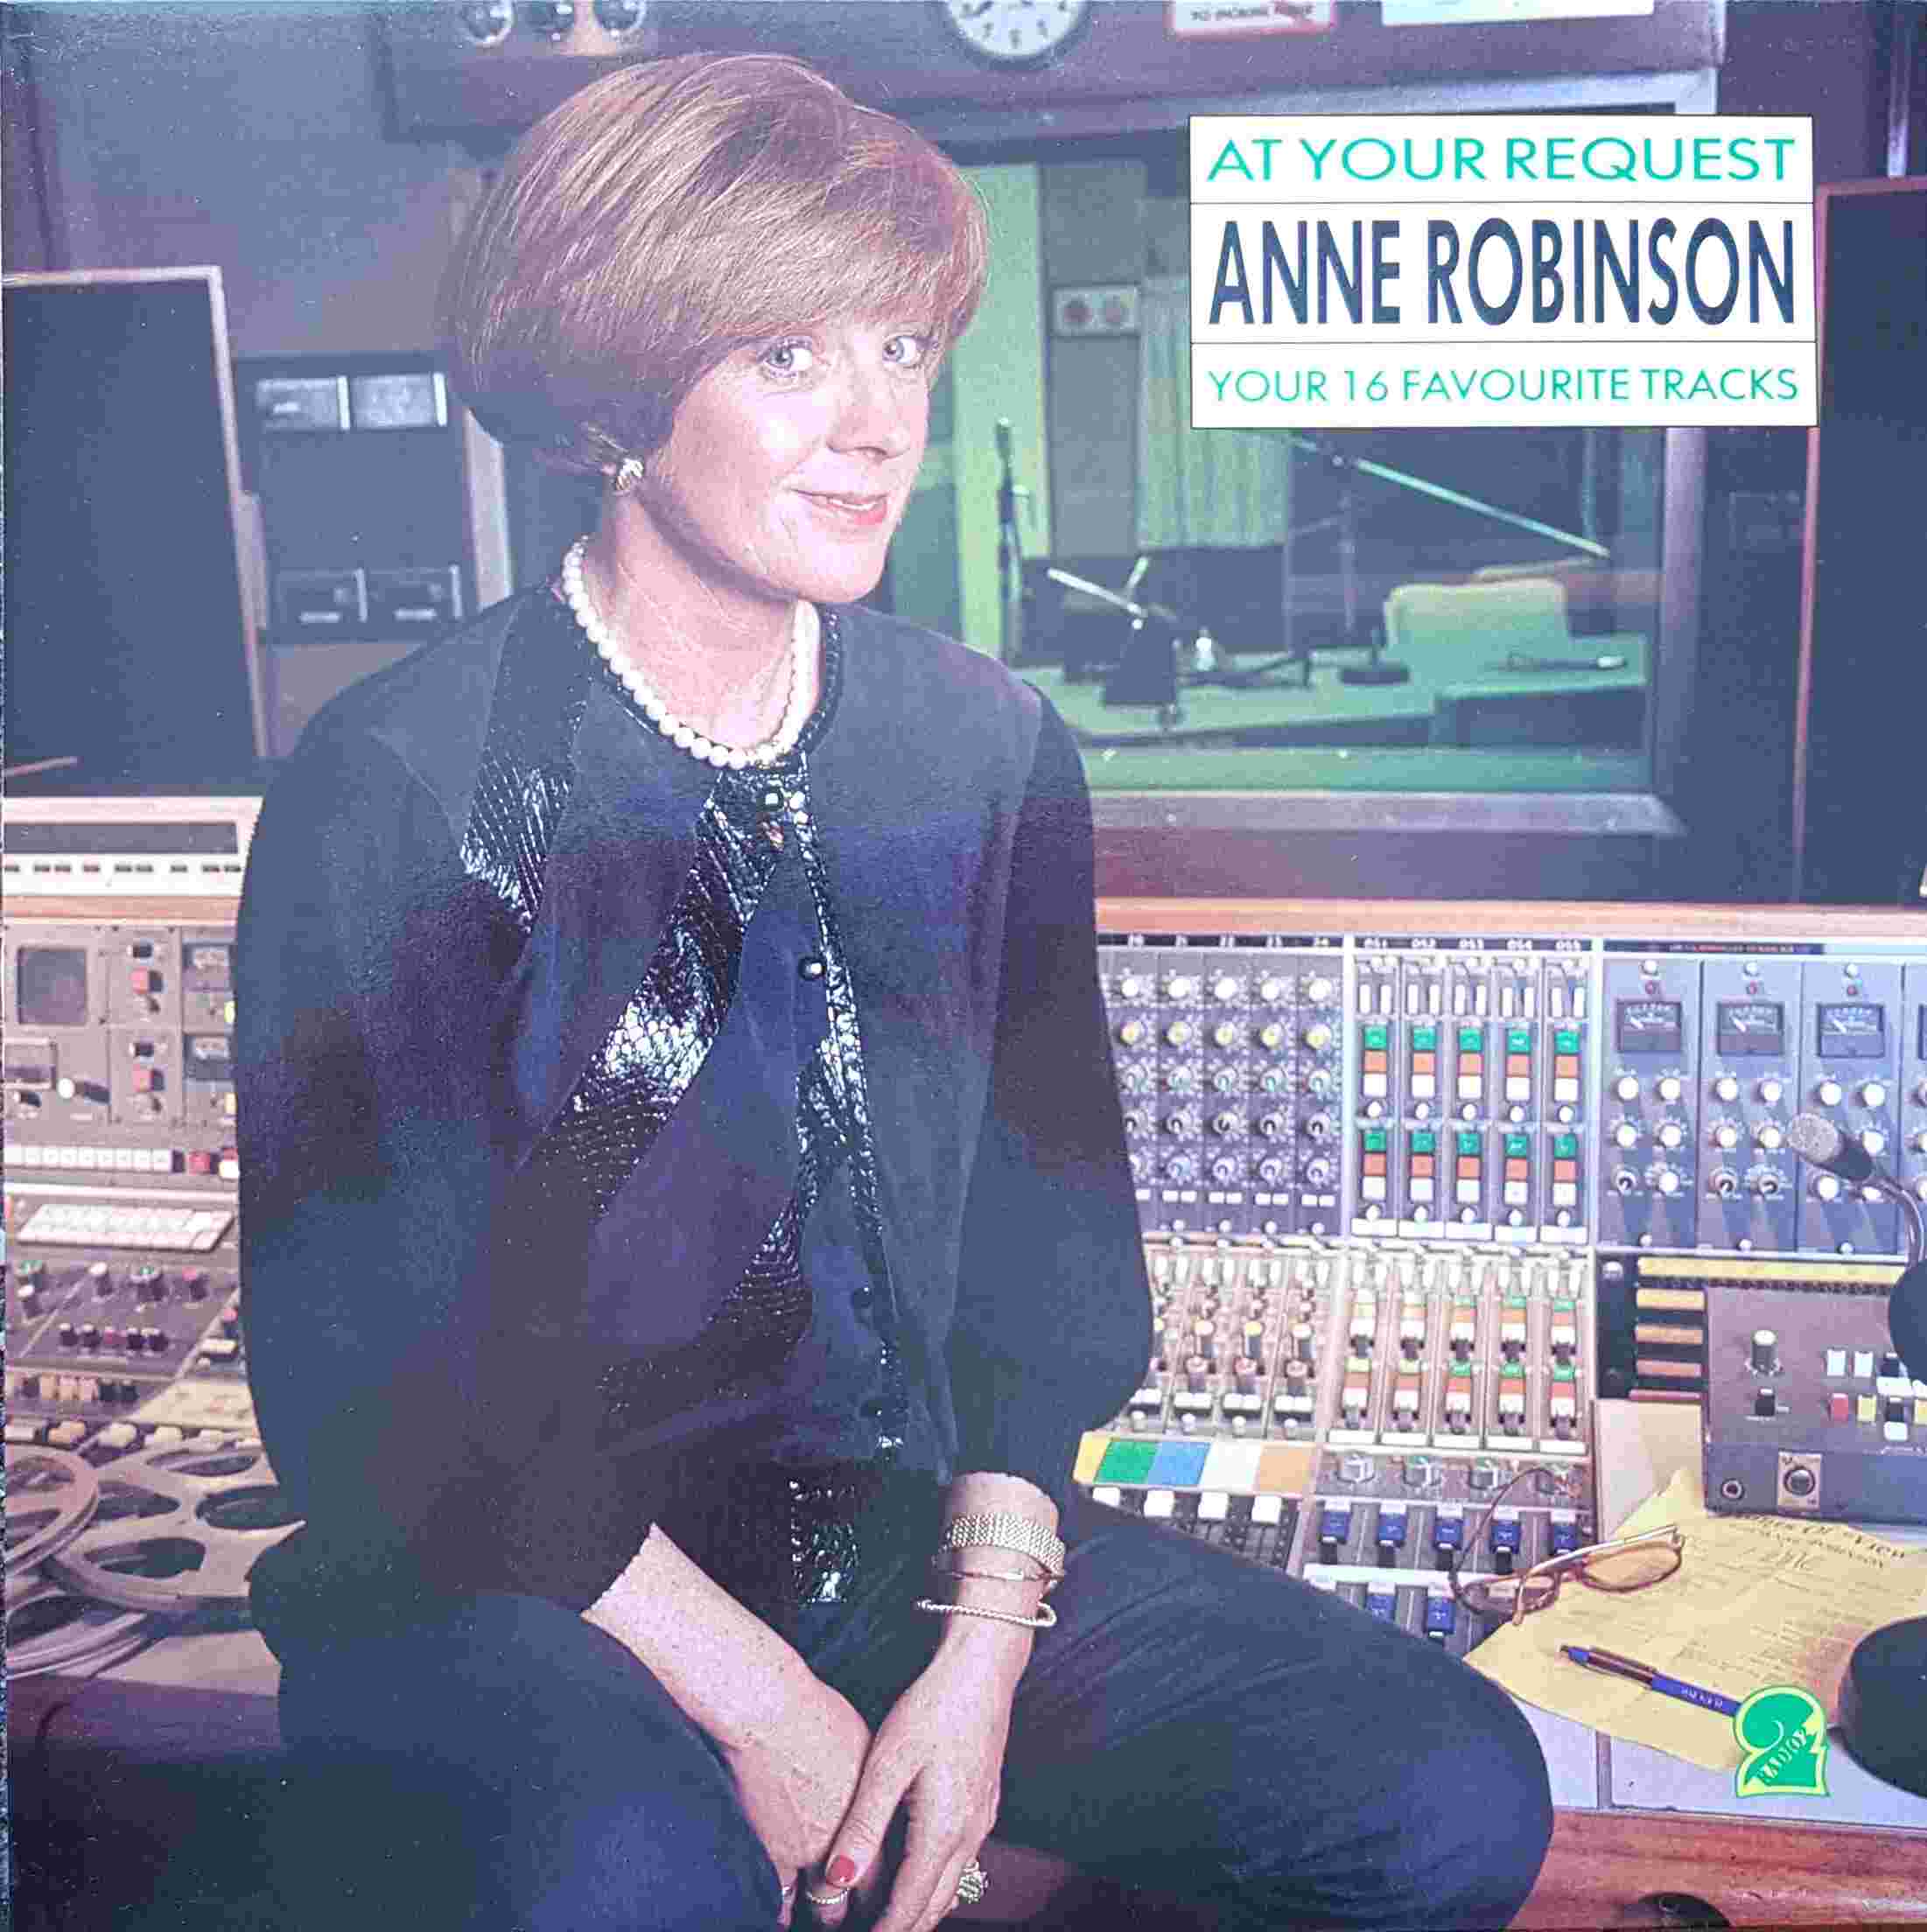 Picture of REN 733 At your request - Anne Robinson by artist Various from the BBC albums - Records and Tapes library